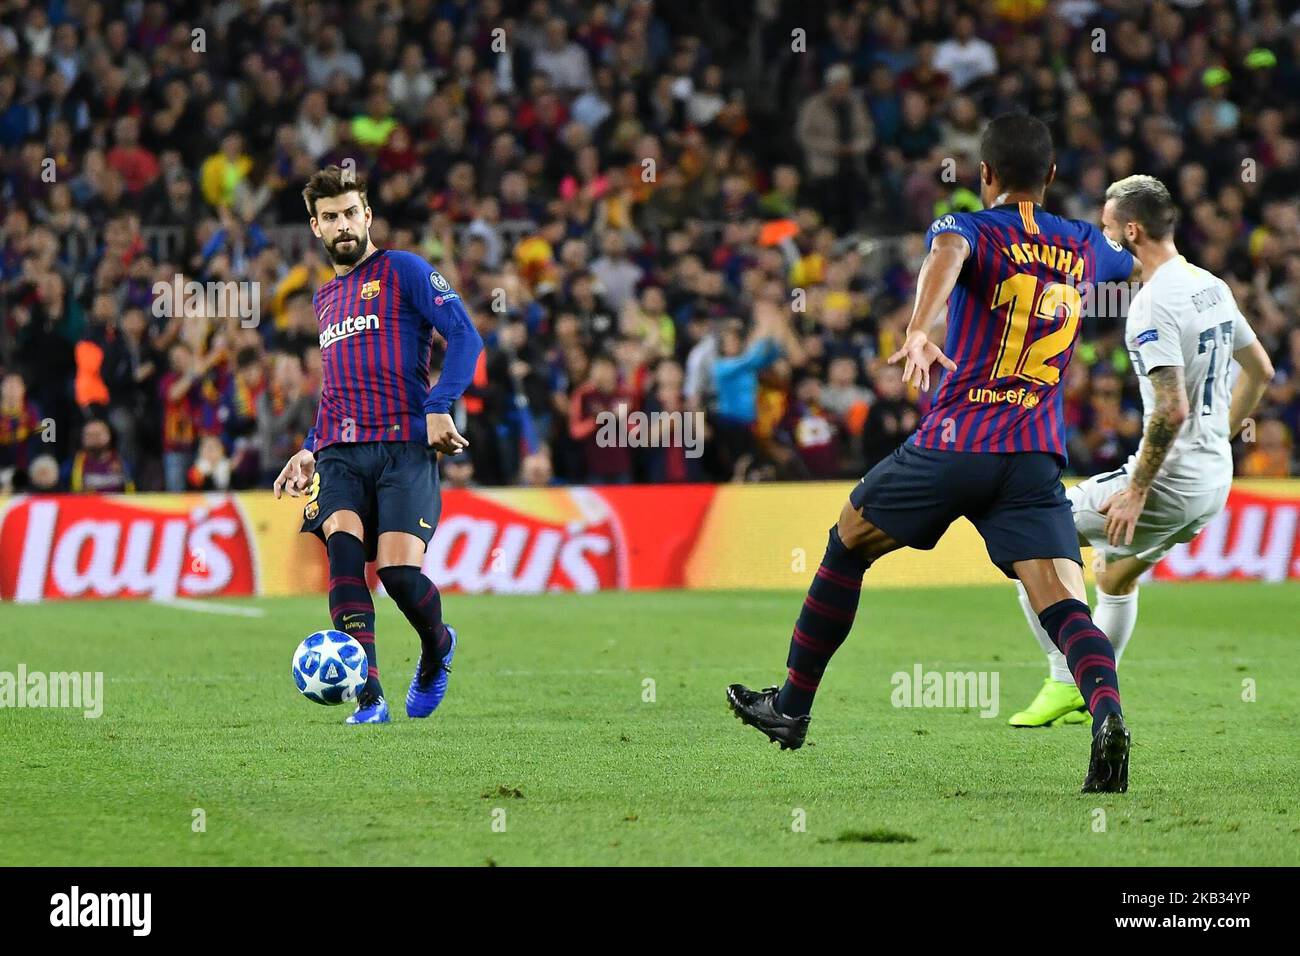 Gerard Pique of FC Barcelona in action during the Champions League, football match between FC Barcelona and FC Internazionale de Milano on October 24, 2018 at Camp Nou stadium in Barcelona, Spain Credit: CORDON PRESS/Alamy Live News Stock Photo